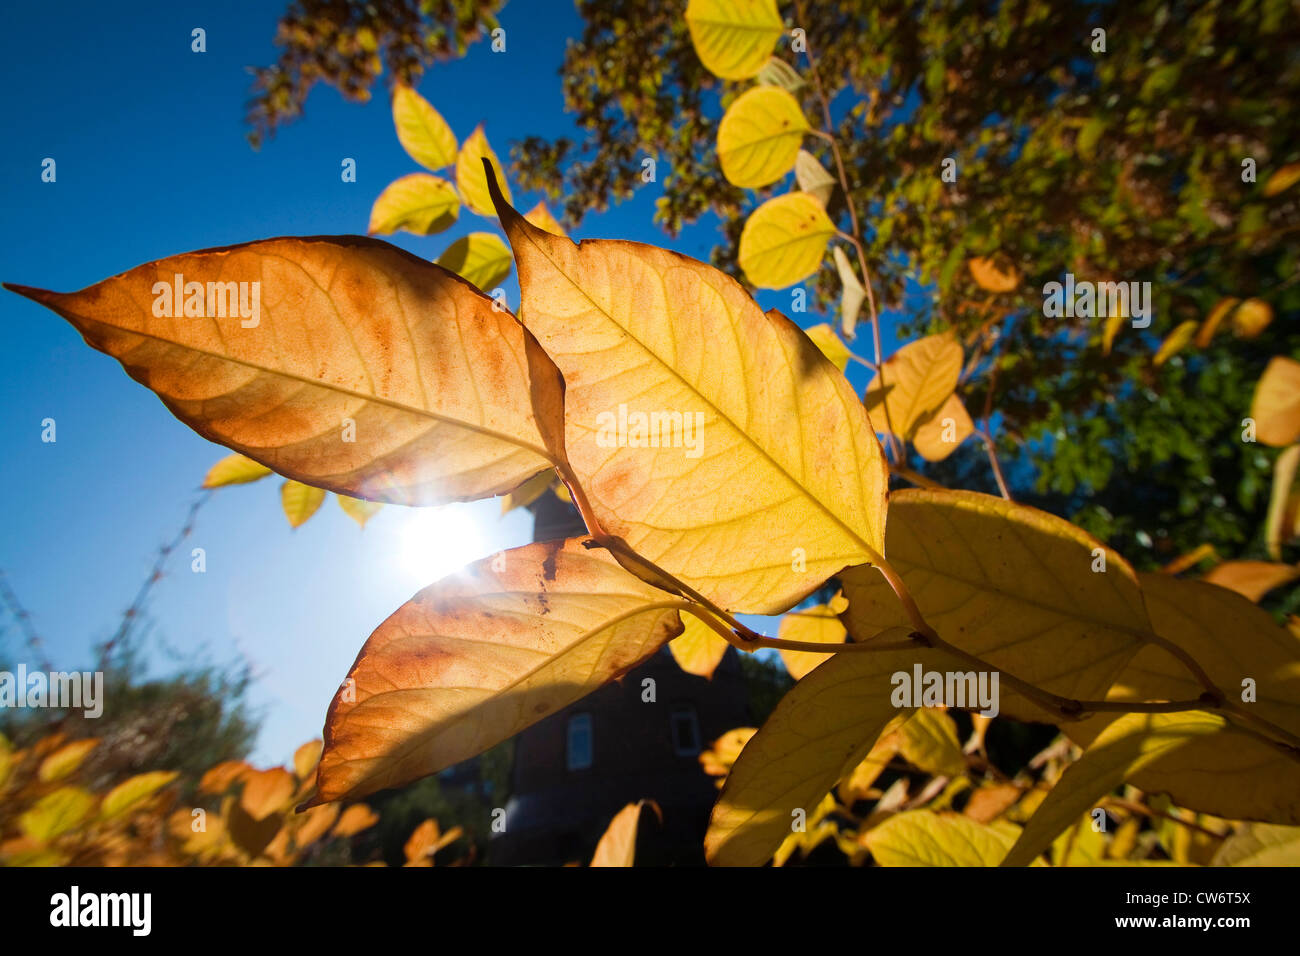 Japanese Knotweed (Fallopia japonica, Reynoutria japonica), leaves in backlight, Germany, Lower Saxony Stock Photo